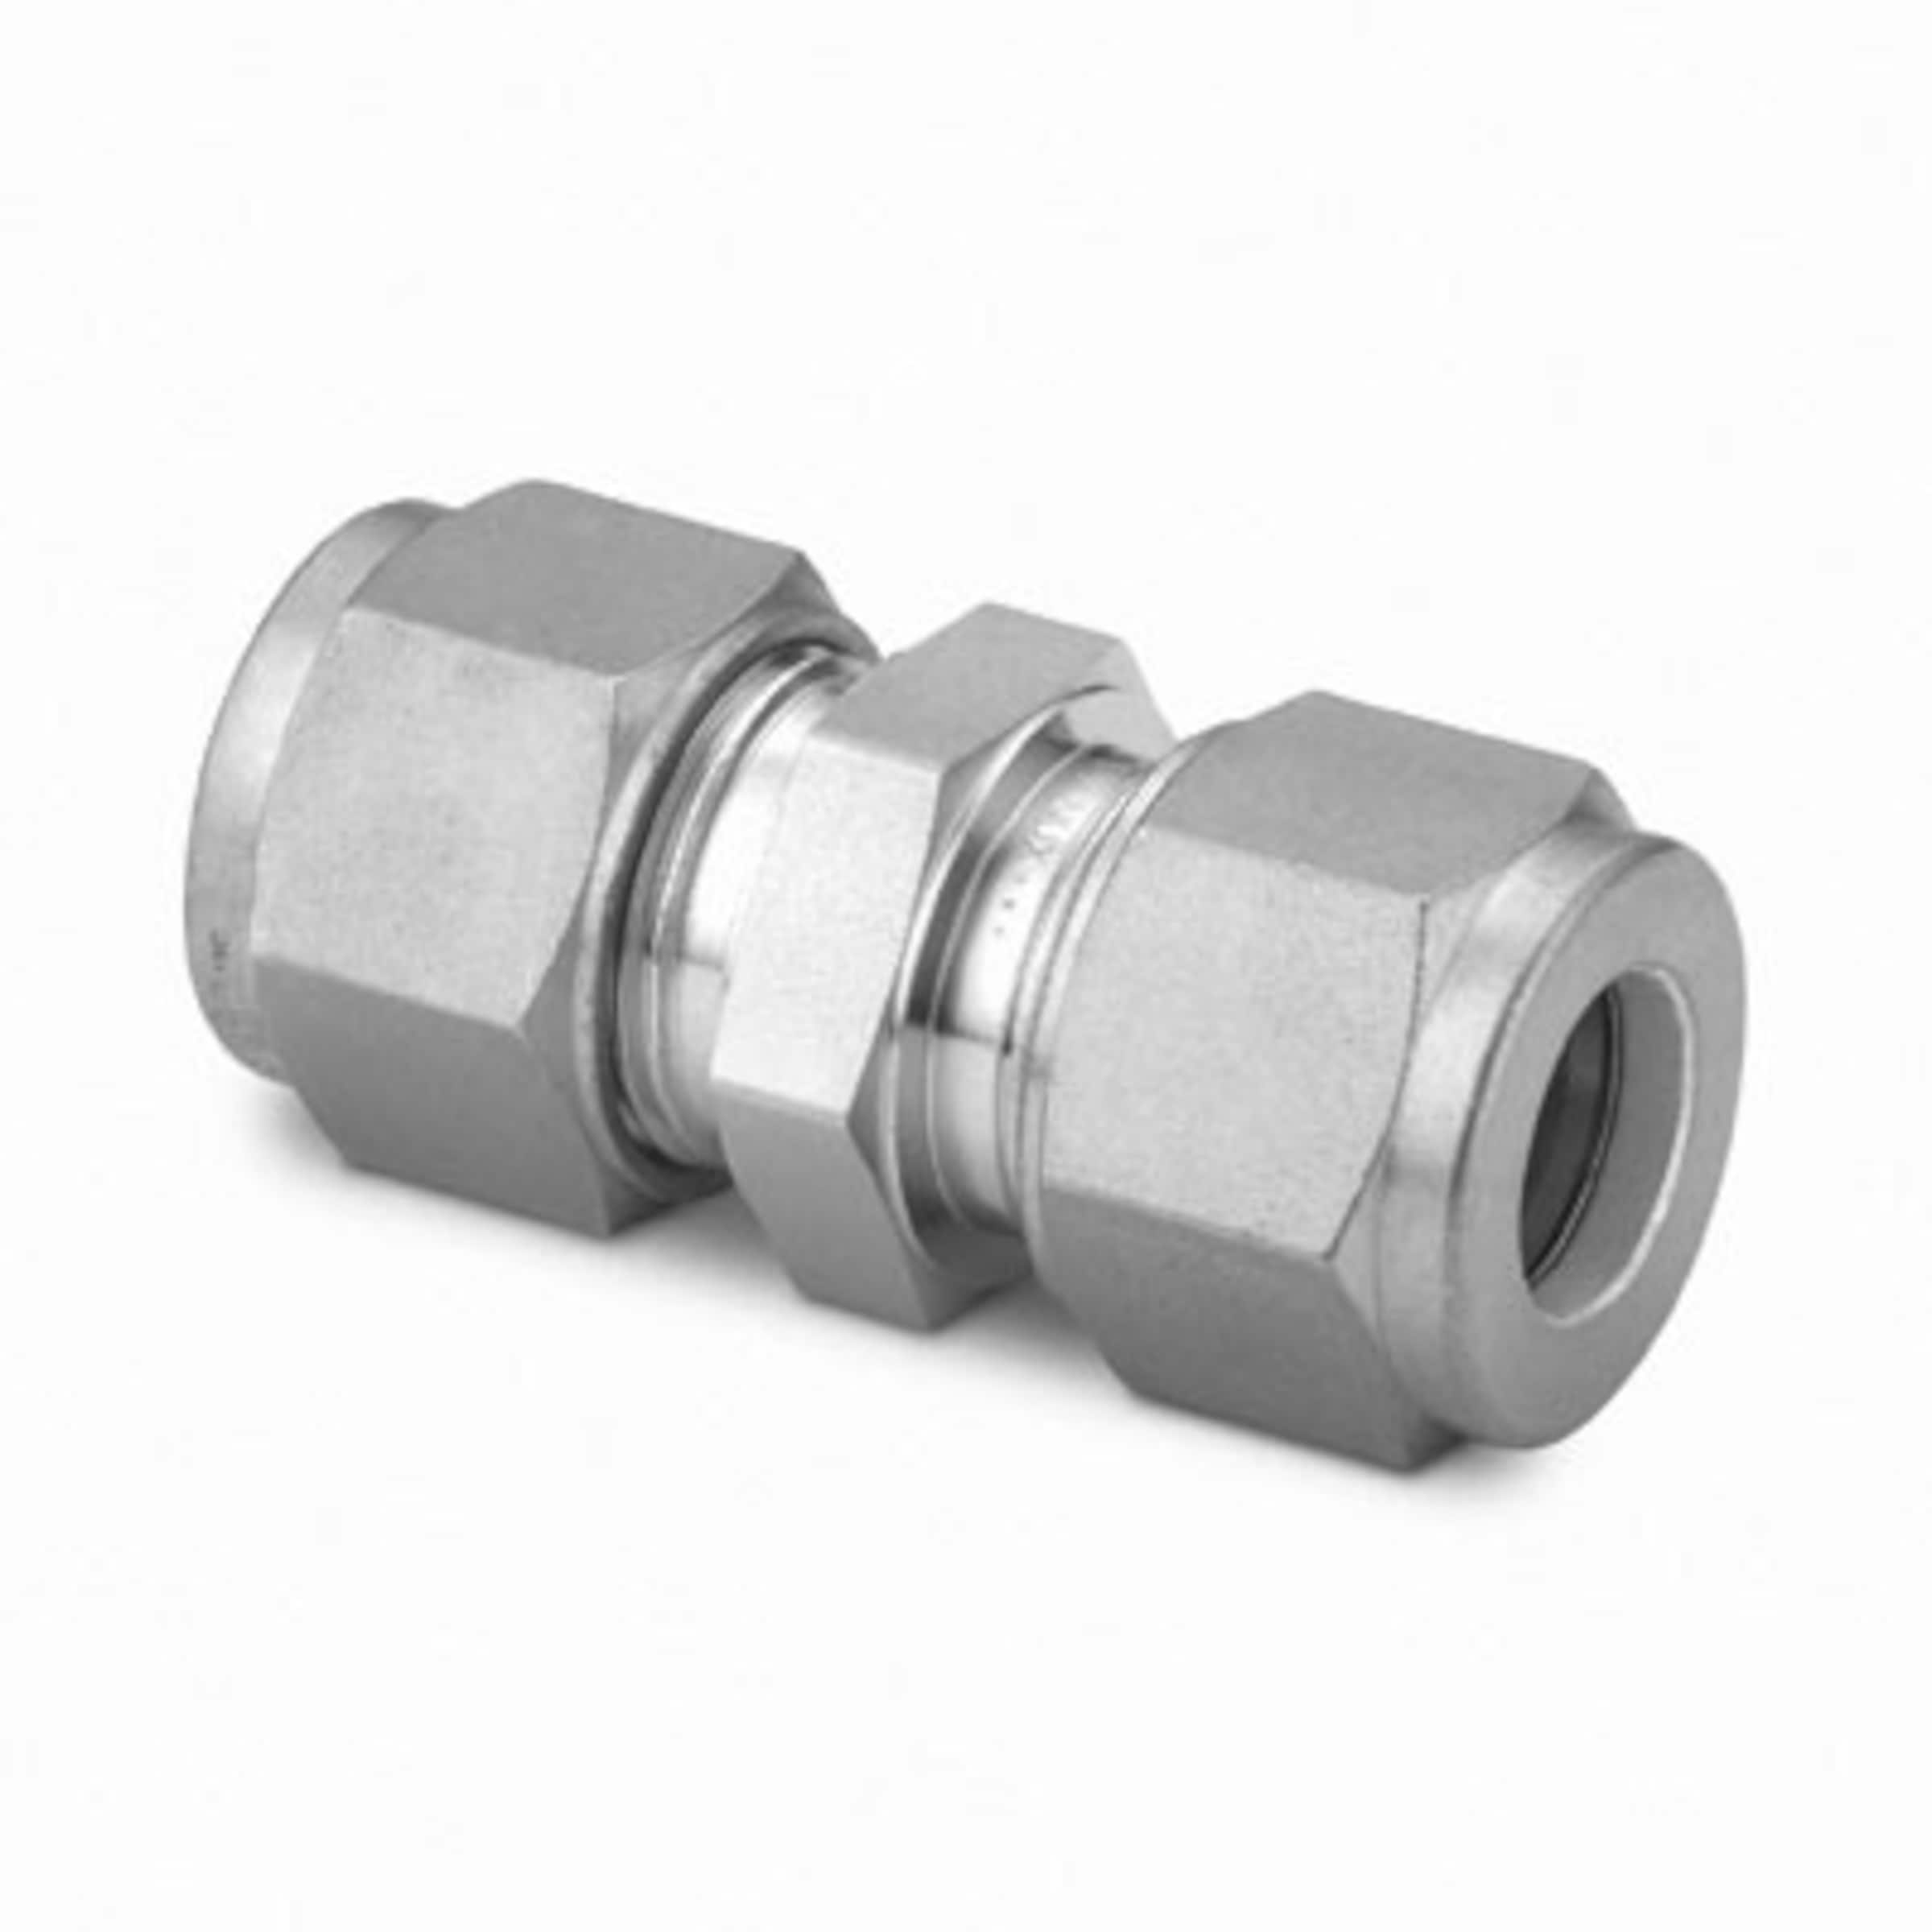 Stainless Steel Ultra-Torr Vacuum Fitting, Union Elbow, 1/4 in. Tube OD, Unions, Ultra-Torr Vacuum Fittings, Fittings, All Products